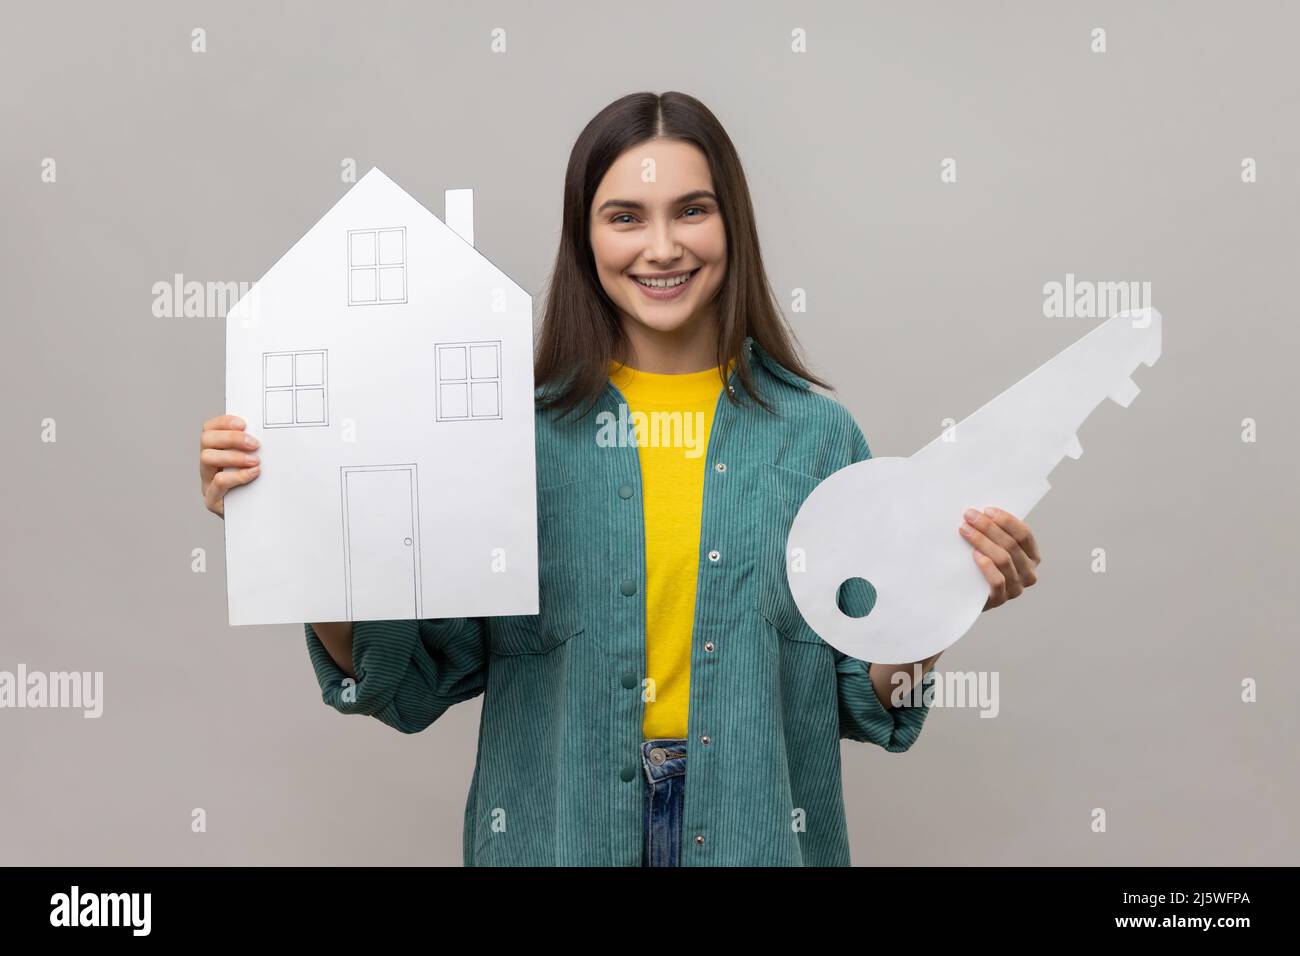 Portrait of smiling woman holding big key and paper house, looking at camera with smile, purchase of real estate, wearing casual style jacket. Indoor studio shot isolated on gray background. Stock Photo